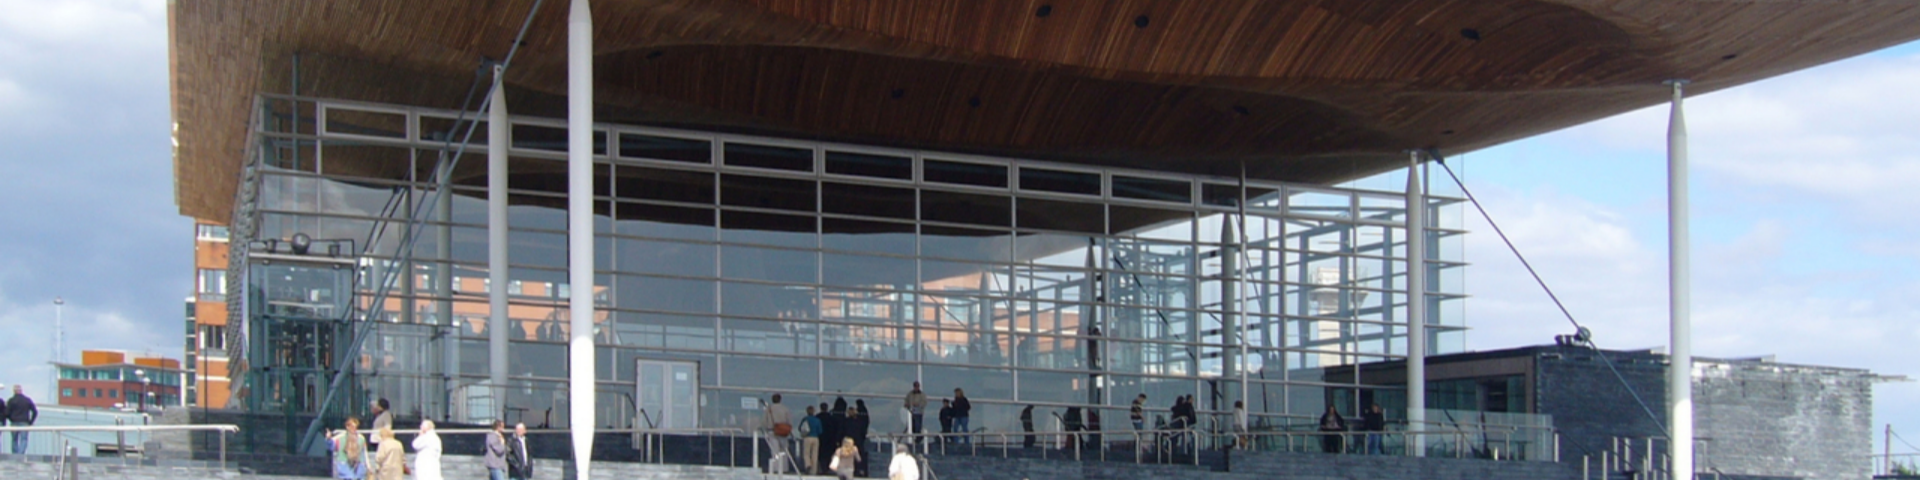 People walk up the steps to the Senedd on a clear blue day.